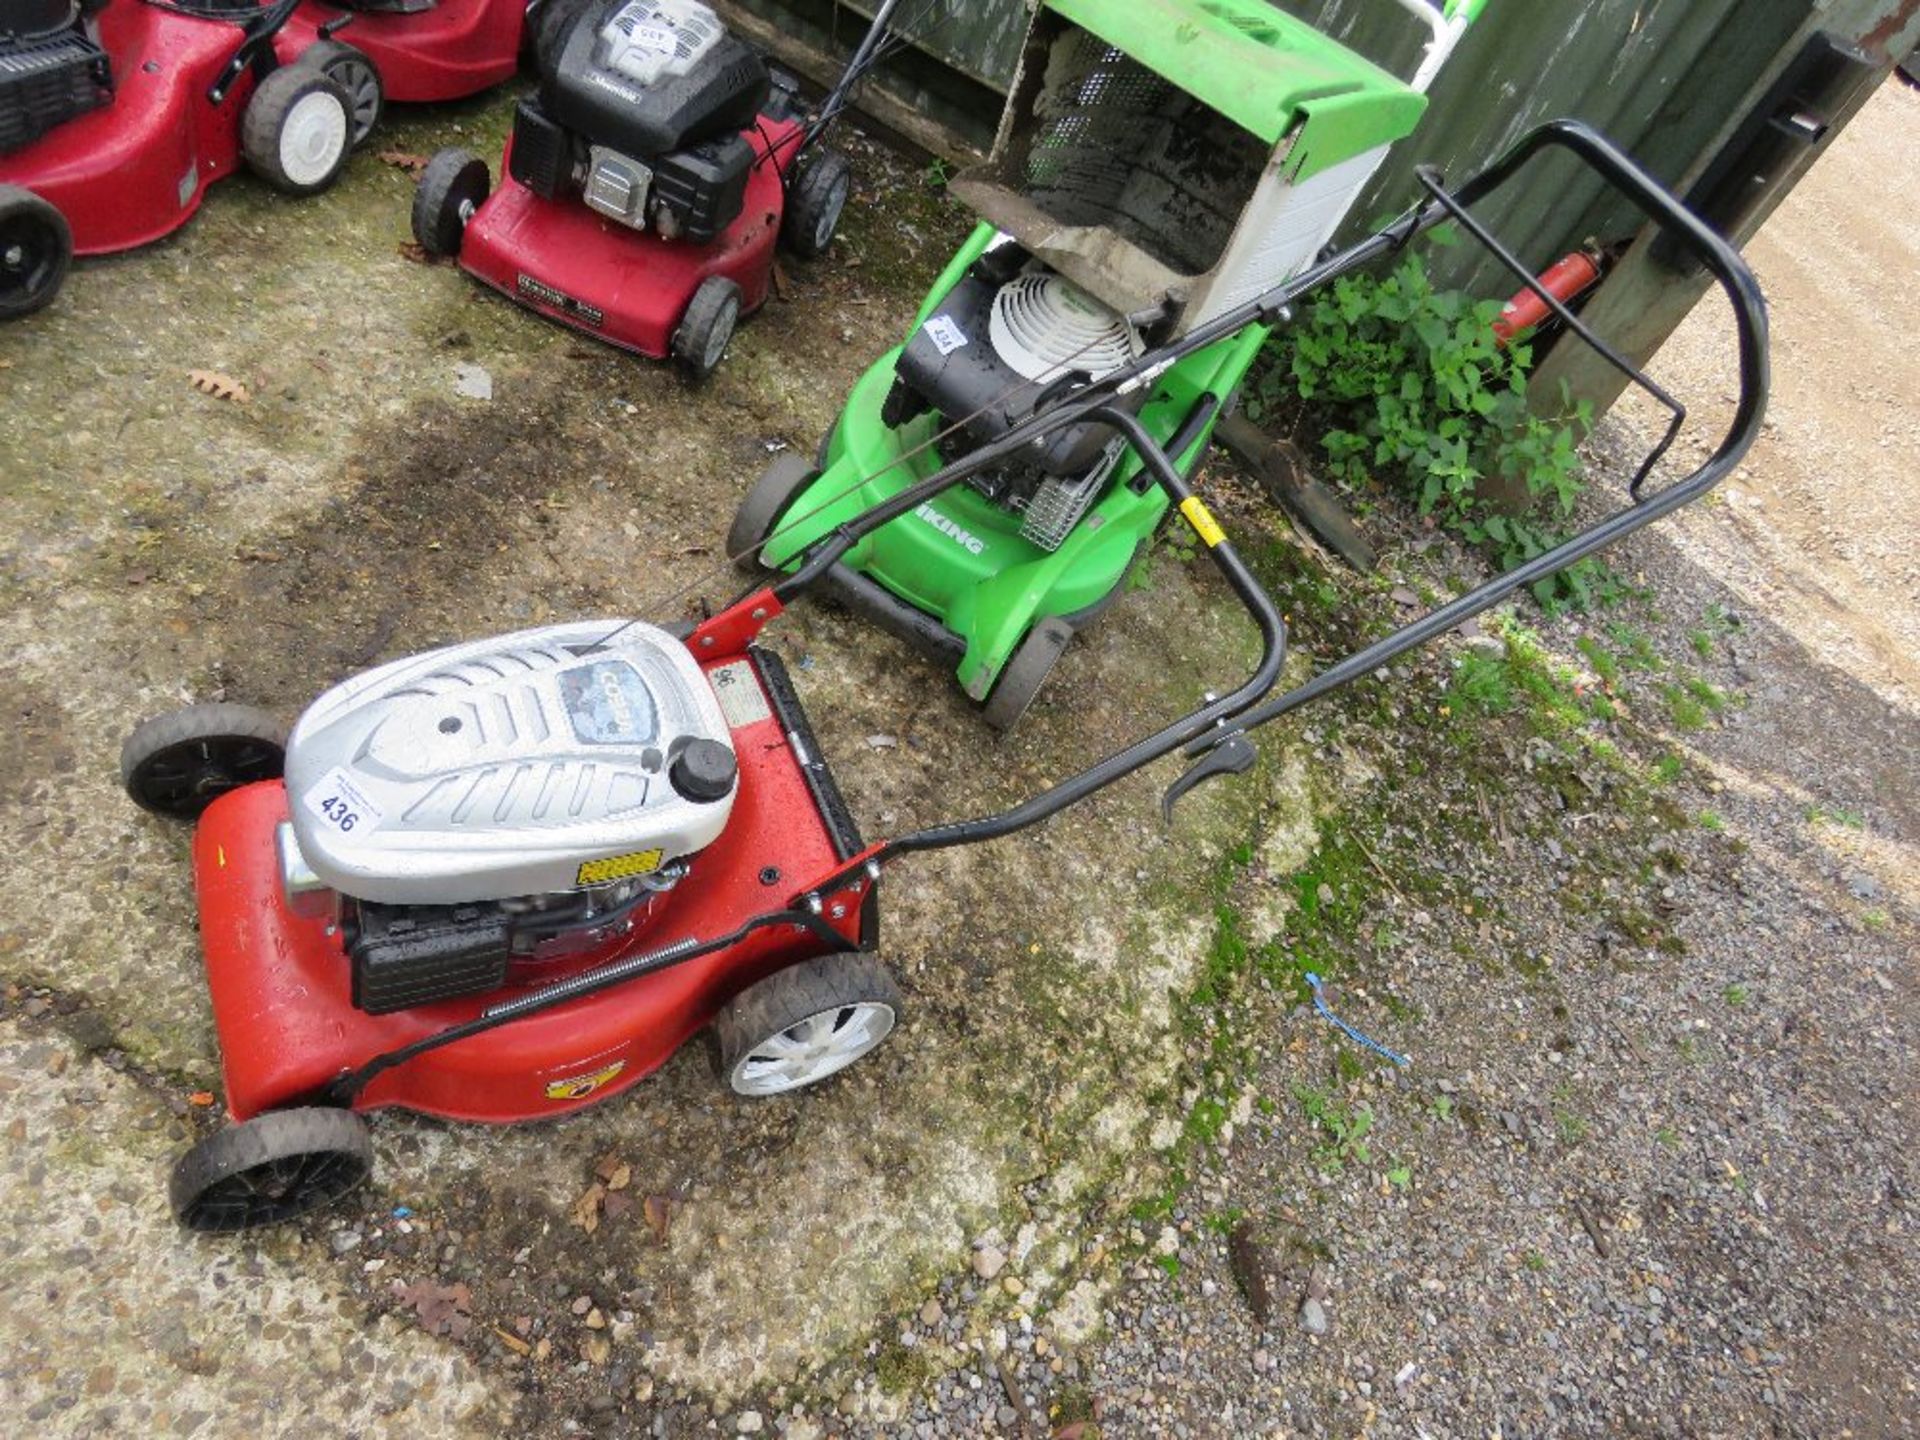 COBRA PETROL ENGINED ROTARY LAWNMOWER. NO COLLECTOR. THIS LOT IS SOLD UNDER THE AUCTIONEERS MARG - Image 2 of 3